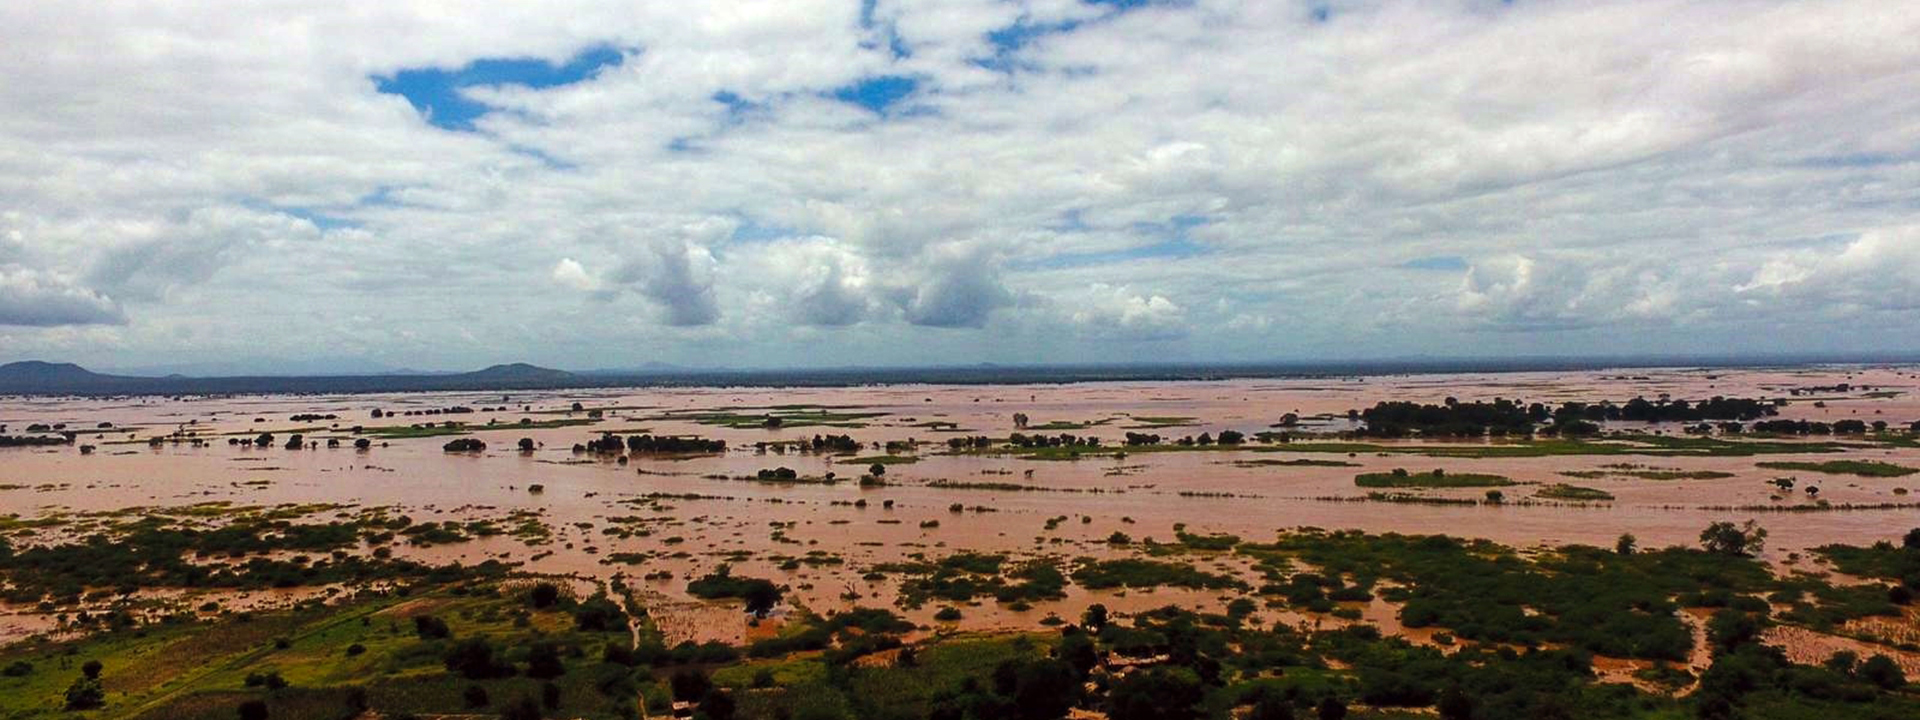 2019 Cyclone Idai: Facts, FAQs, and how to help